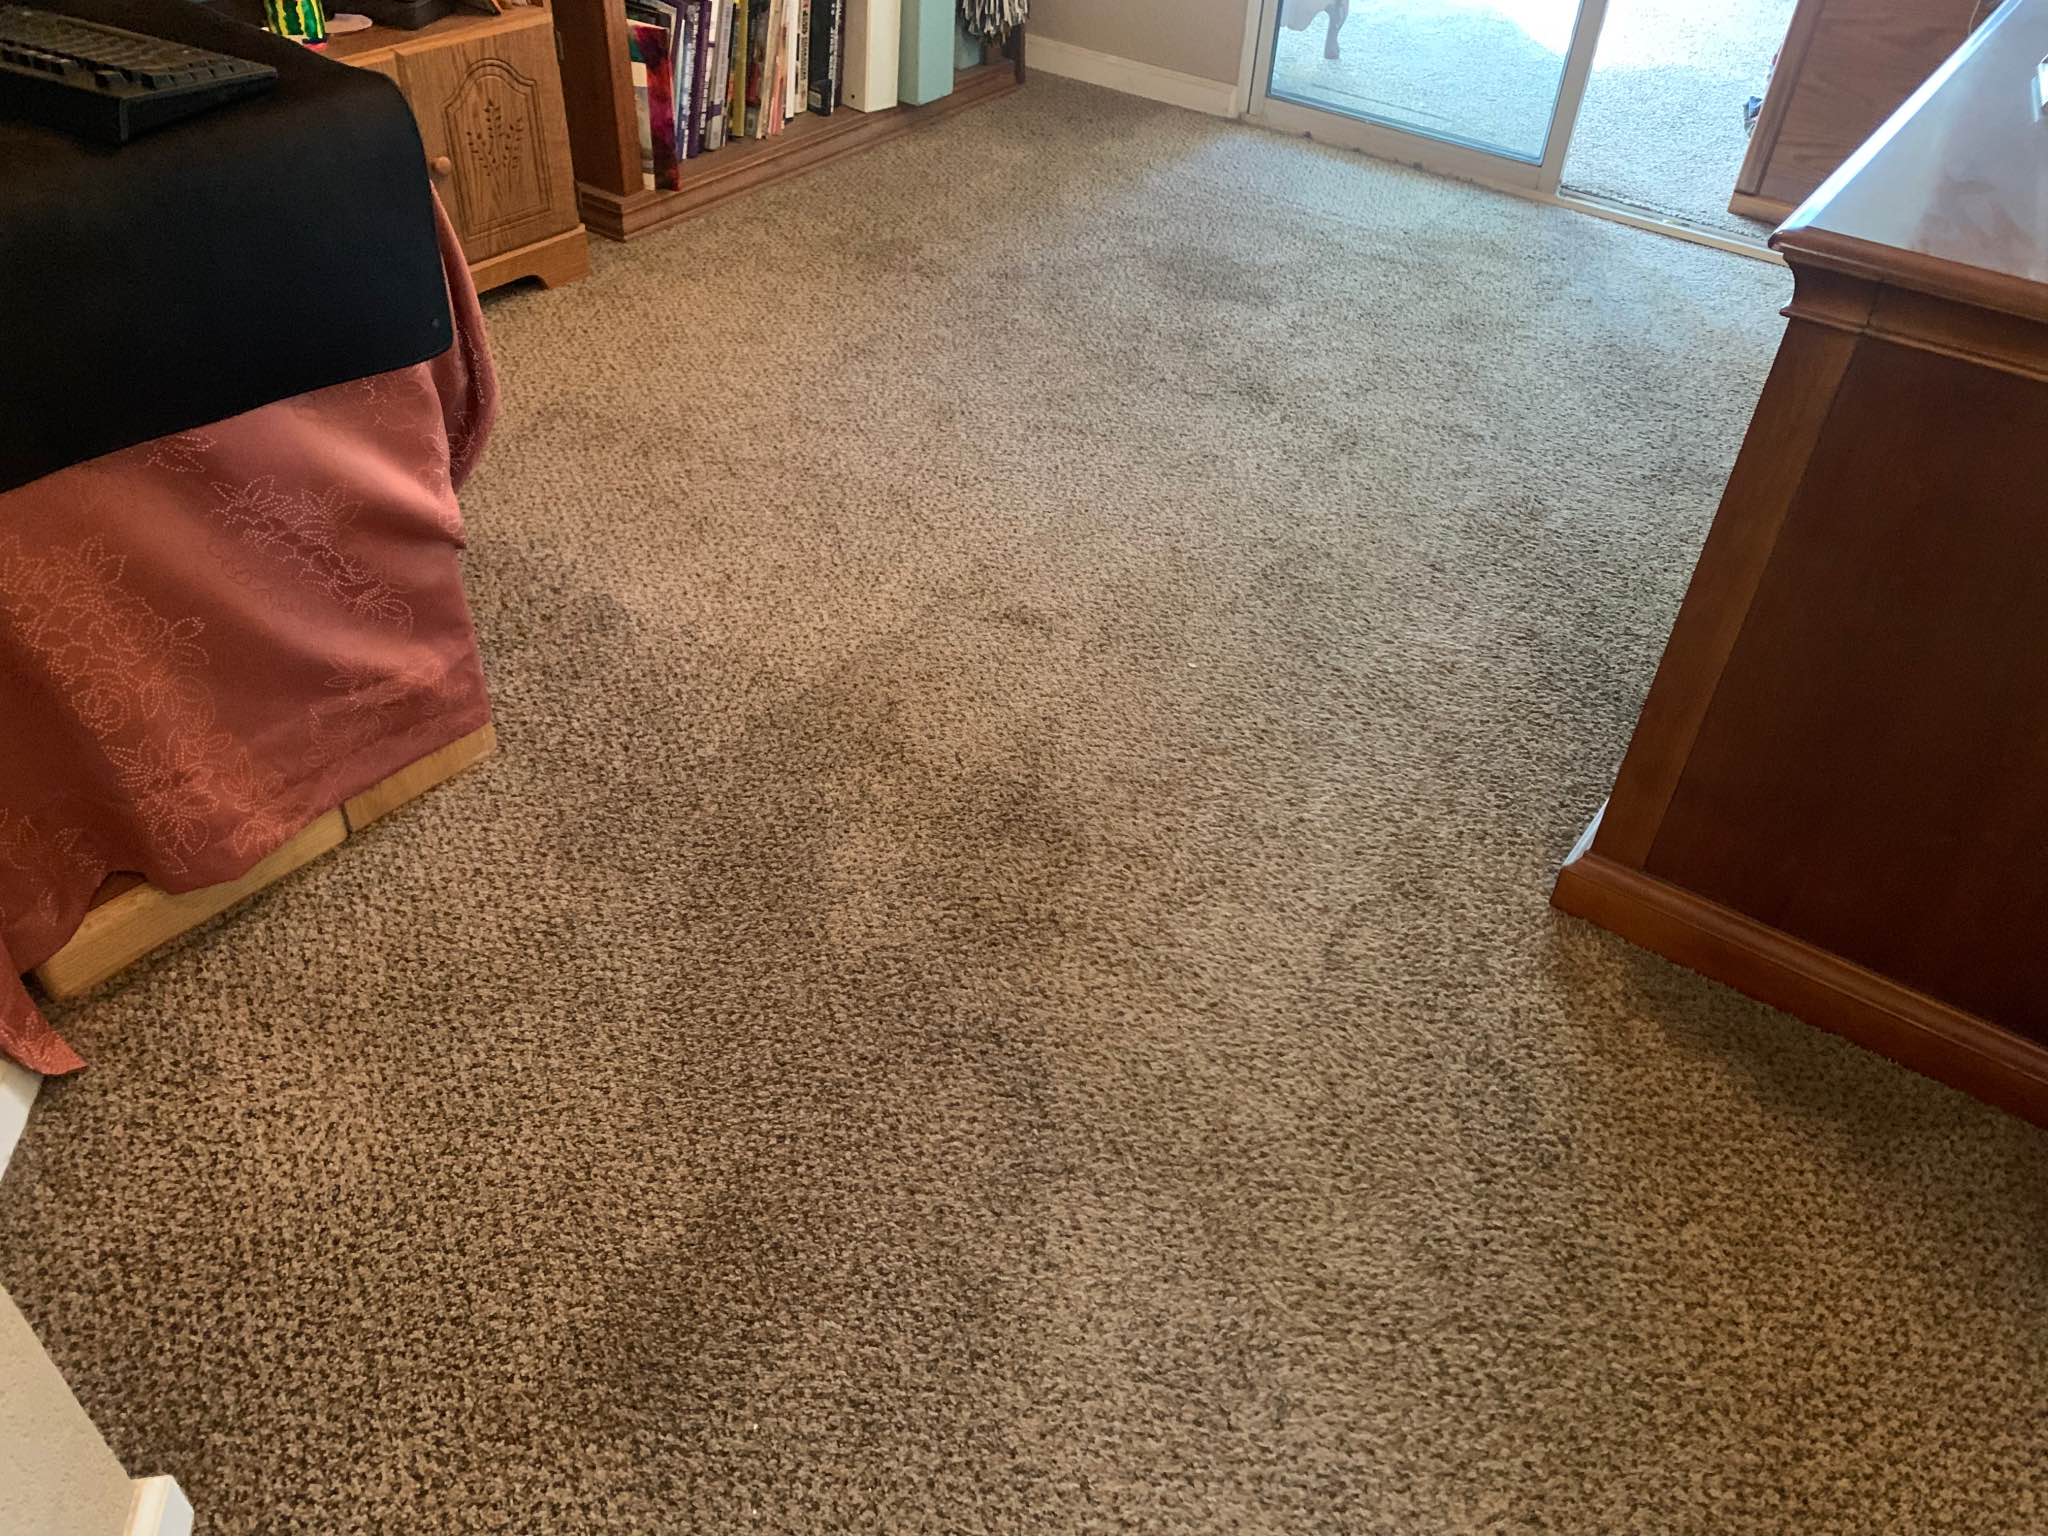 How Steam Cleaning Carpets Helps At End Of Tenancy?